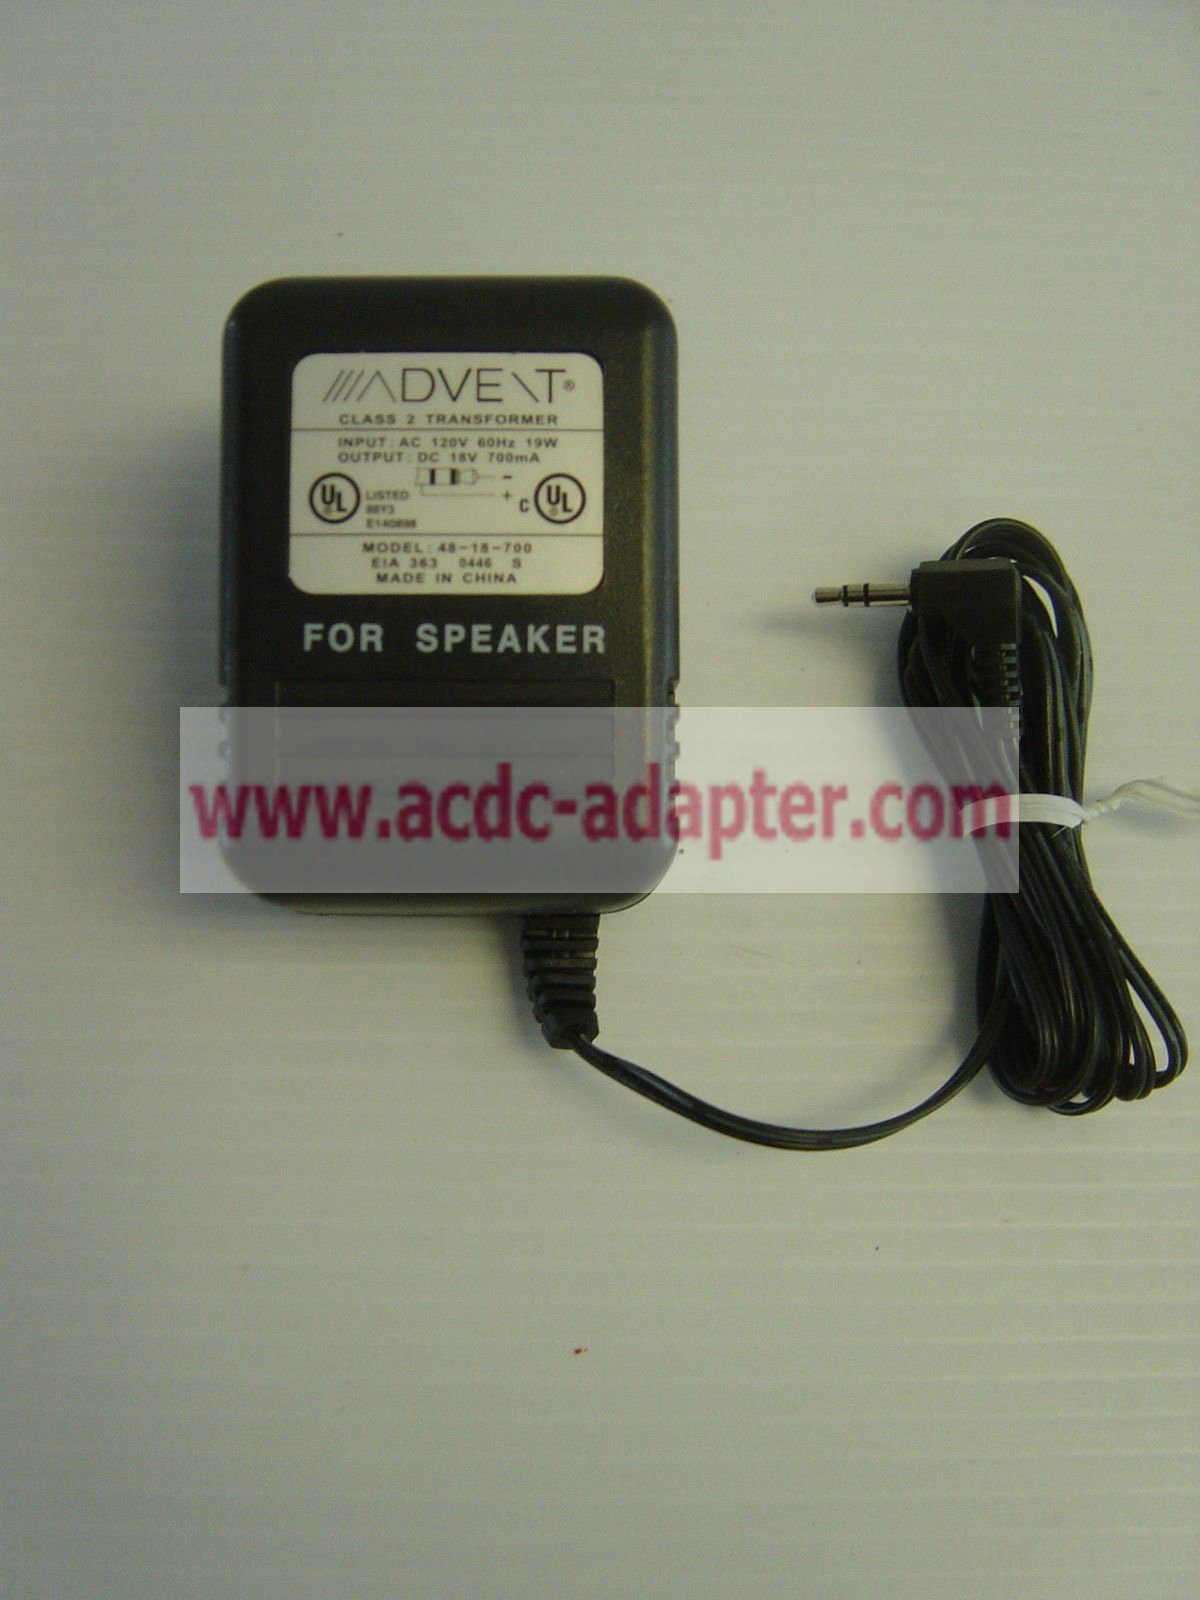 New Advent 48-18-700 18V 700mA POWER SUPPLY ADAPTER Subwoofer 3.5MM transformer ch